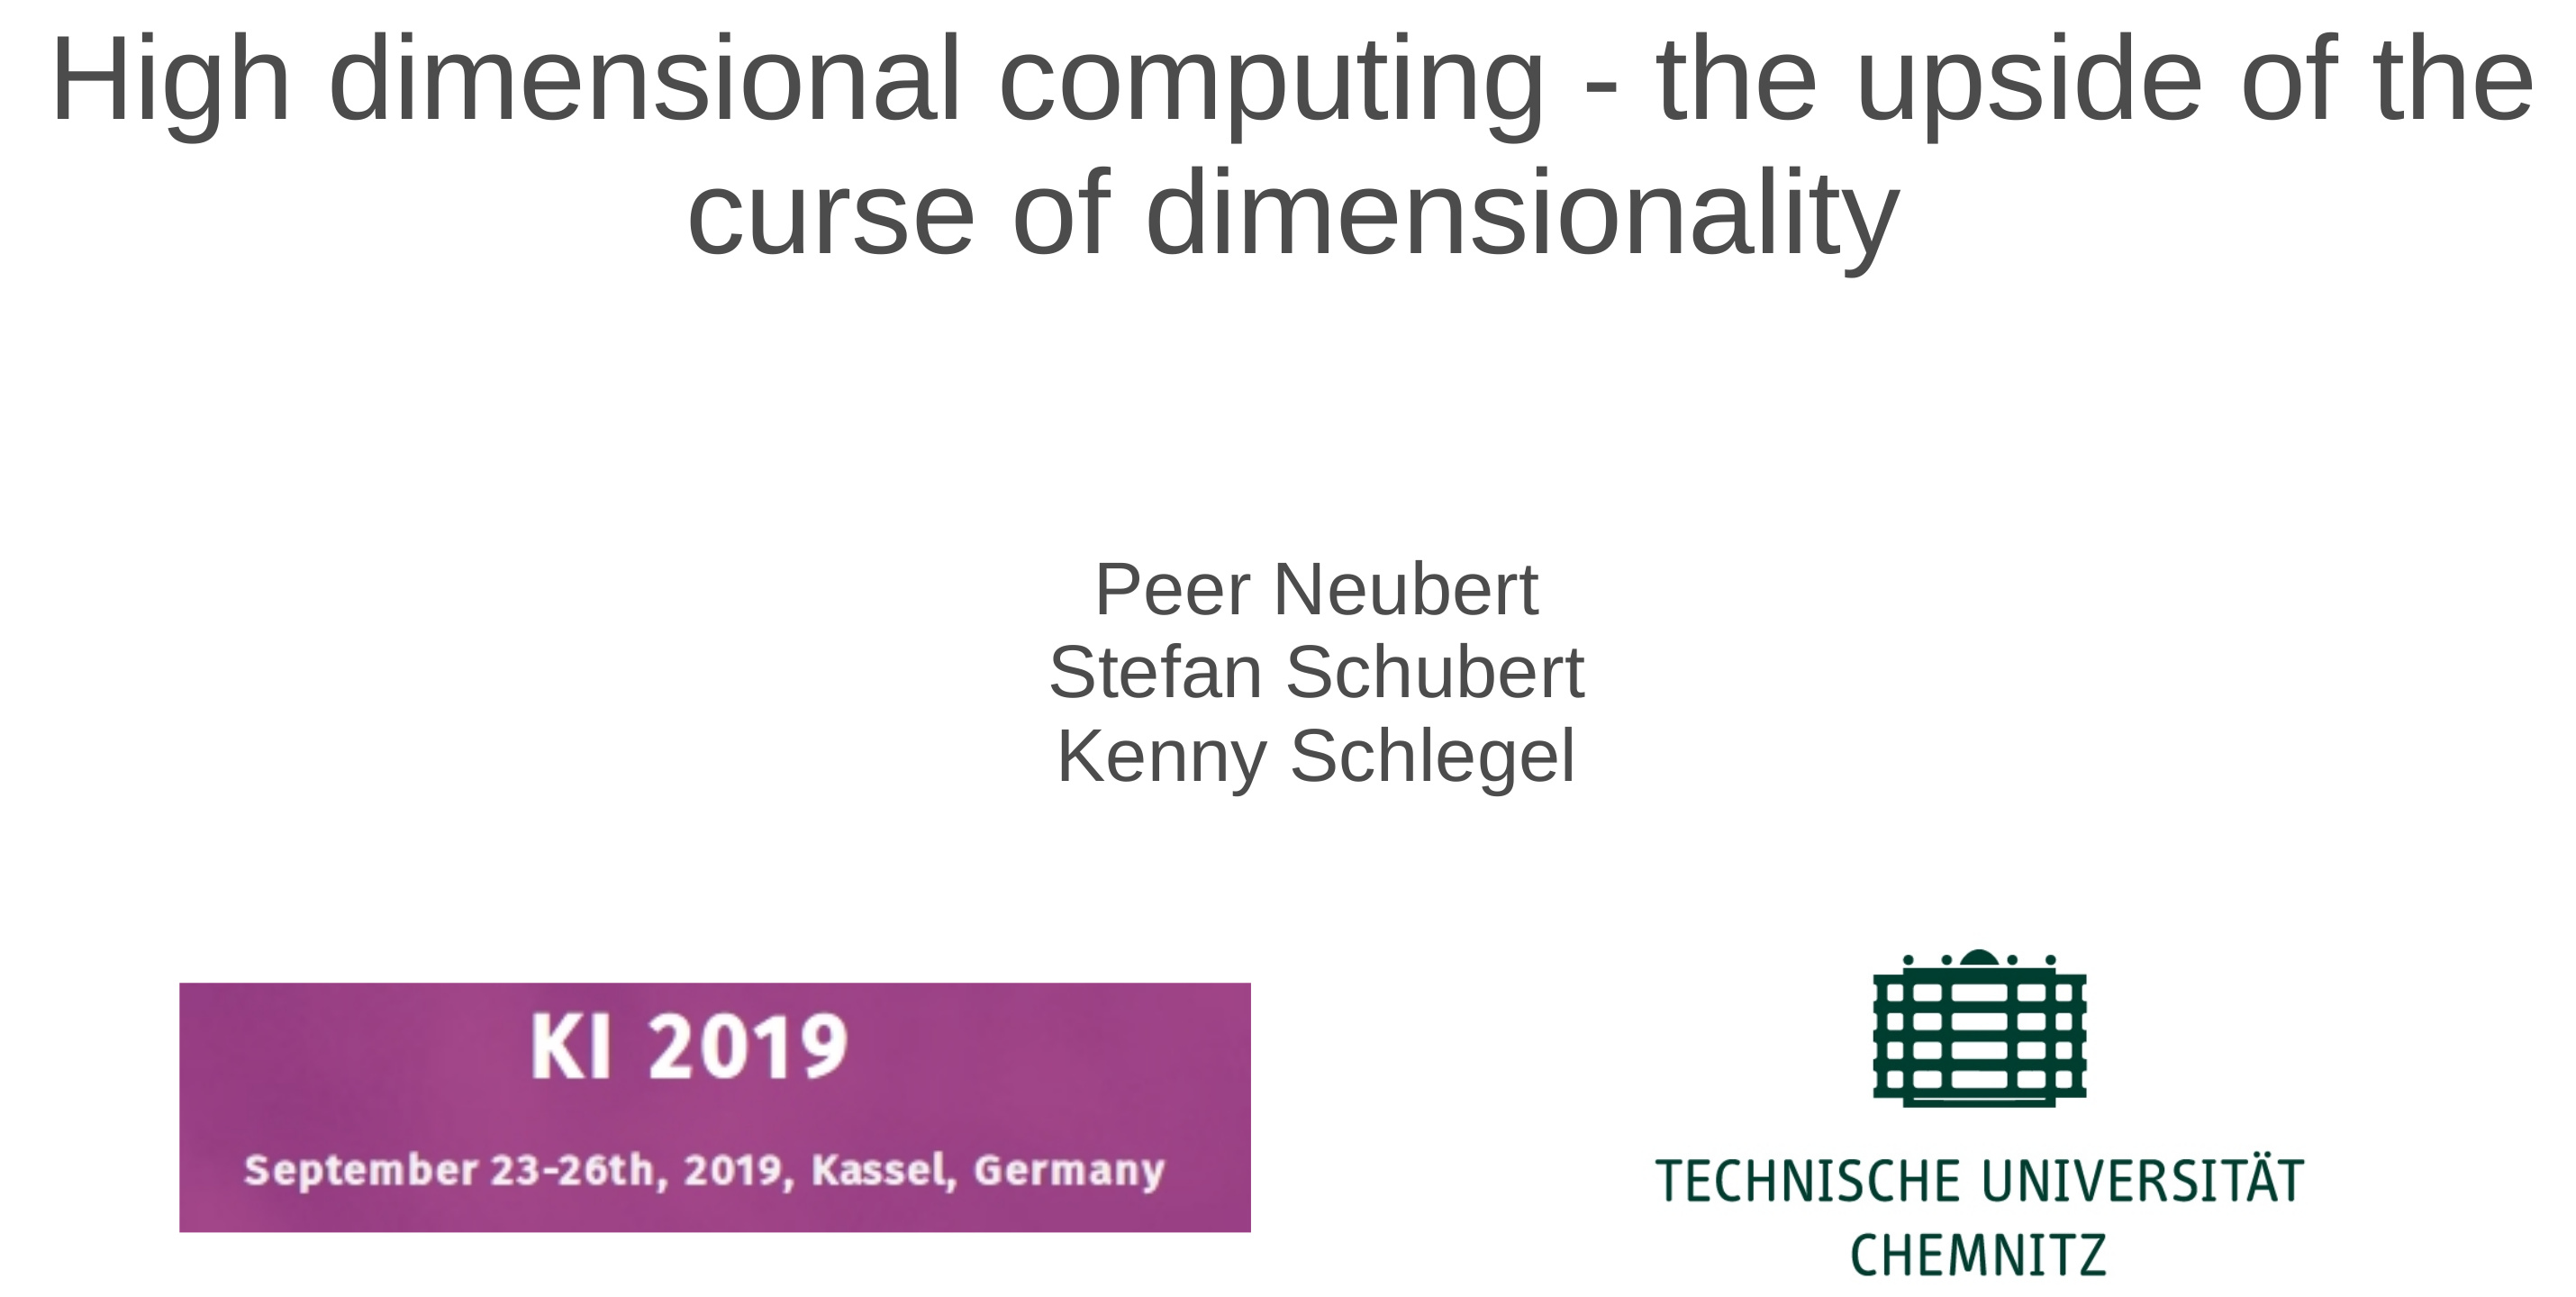 KI 2019 Tutorial on High dimensional computing - the upside of the curse of dimensionality. Stefan Schubert